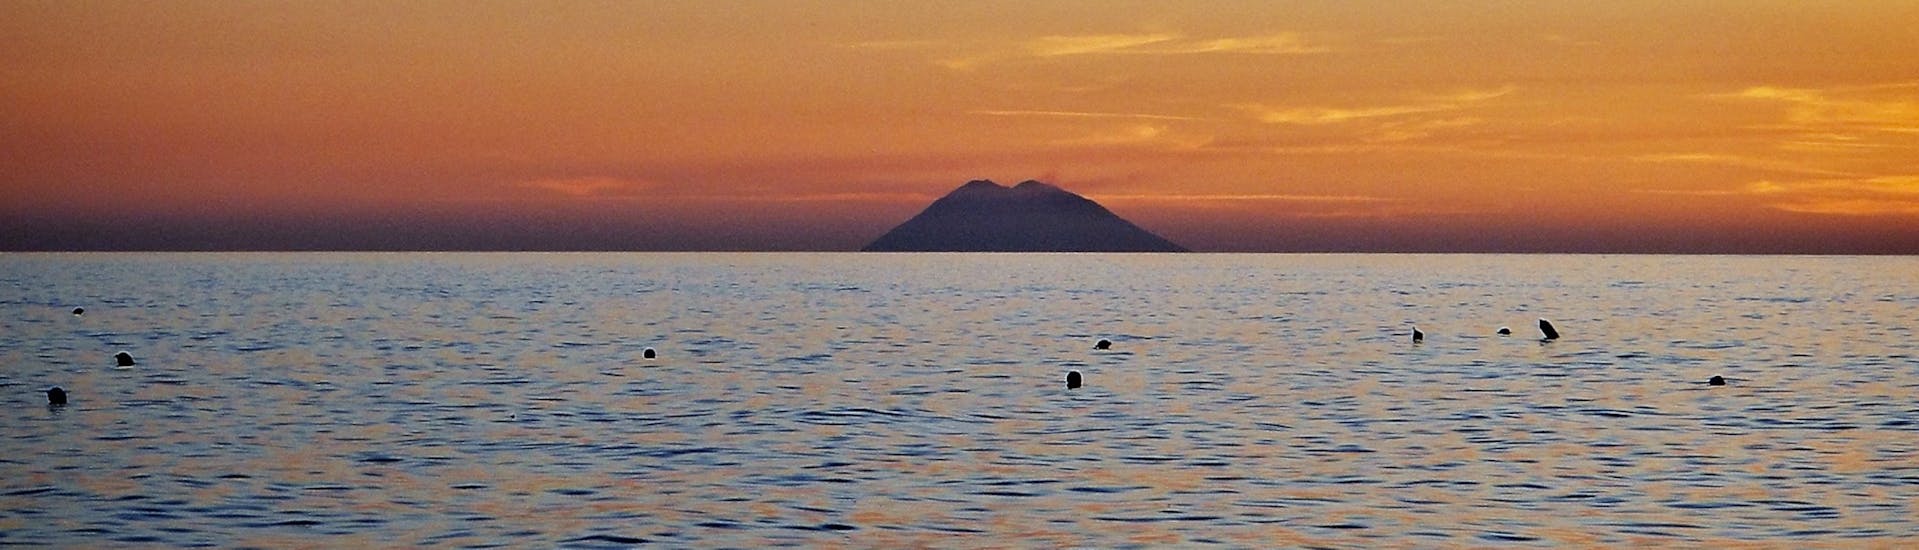 Stromboli at sunset during the Sunset RIB Boat Trip from Tropea along the Coast of the Gods.